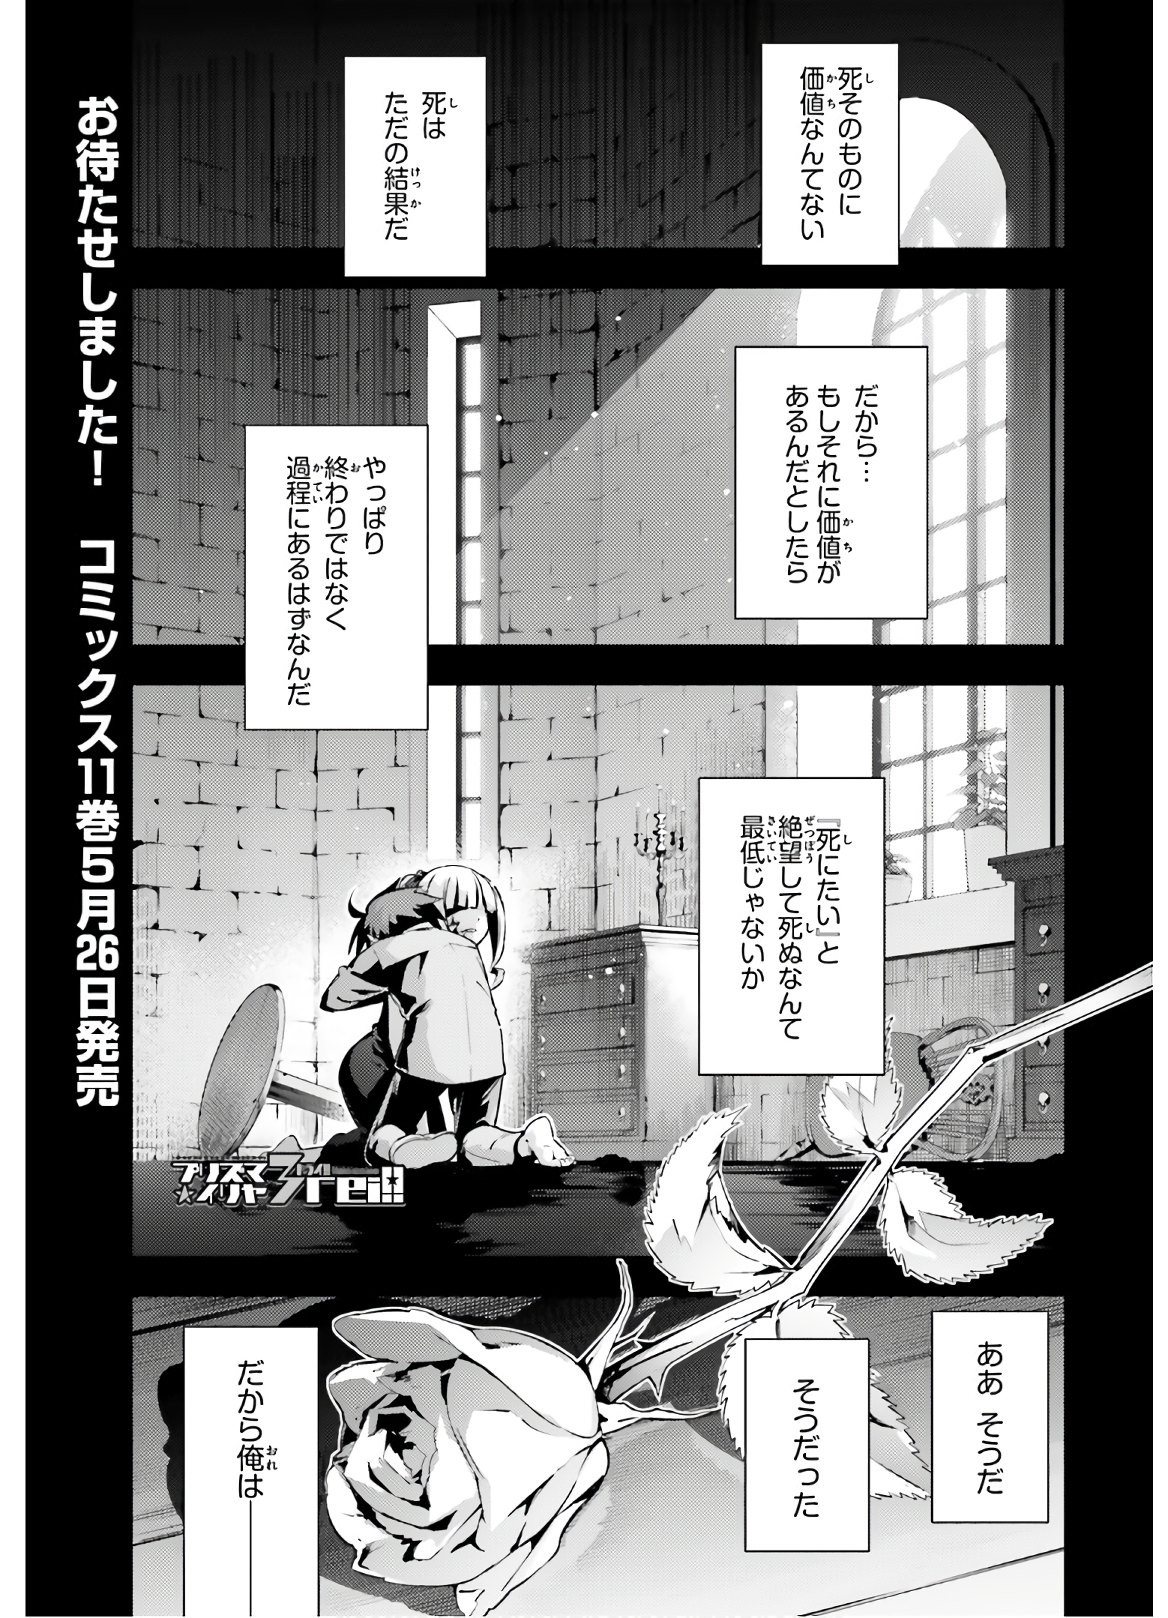 Fate/Kaleid Liner Prisma Illya Drei! - Chapter 57-1 - Page 1